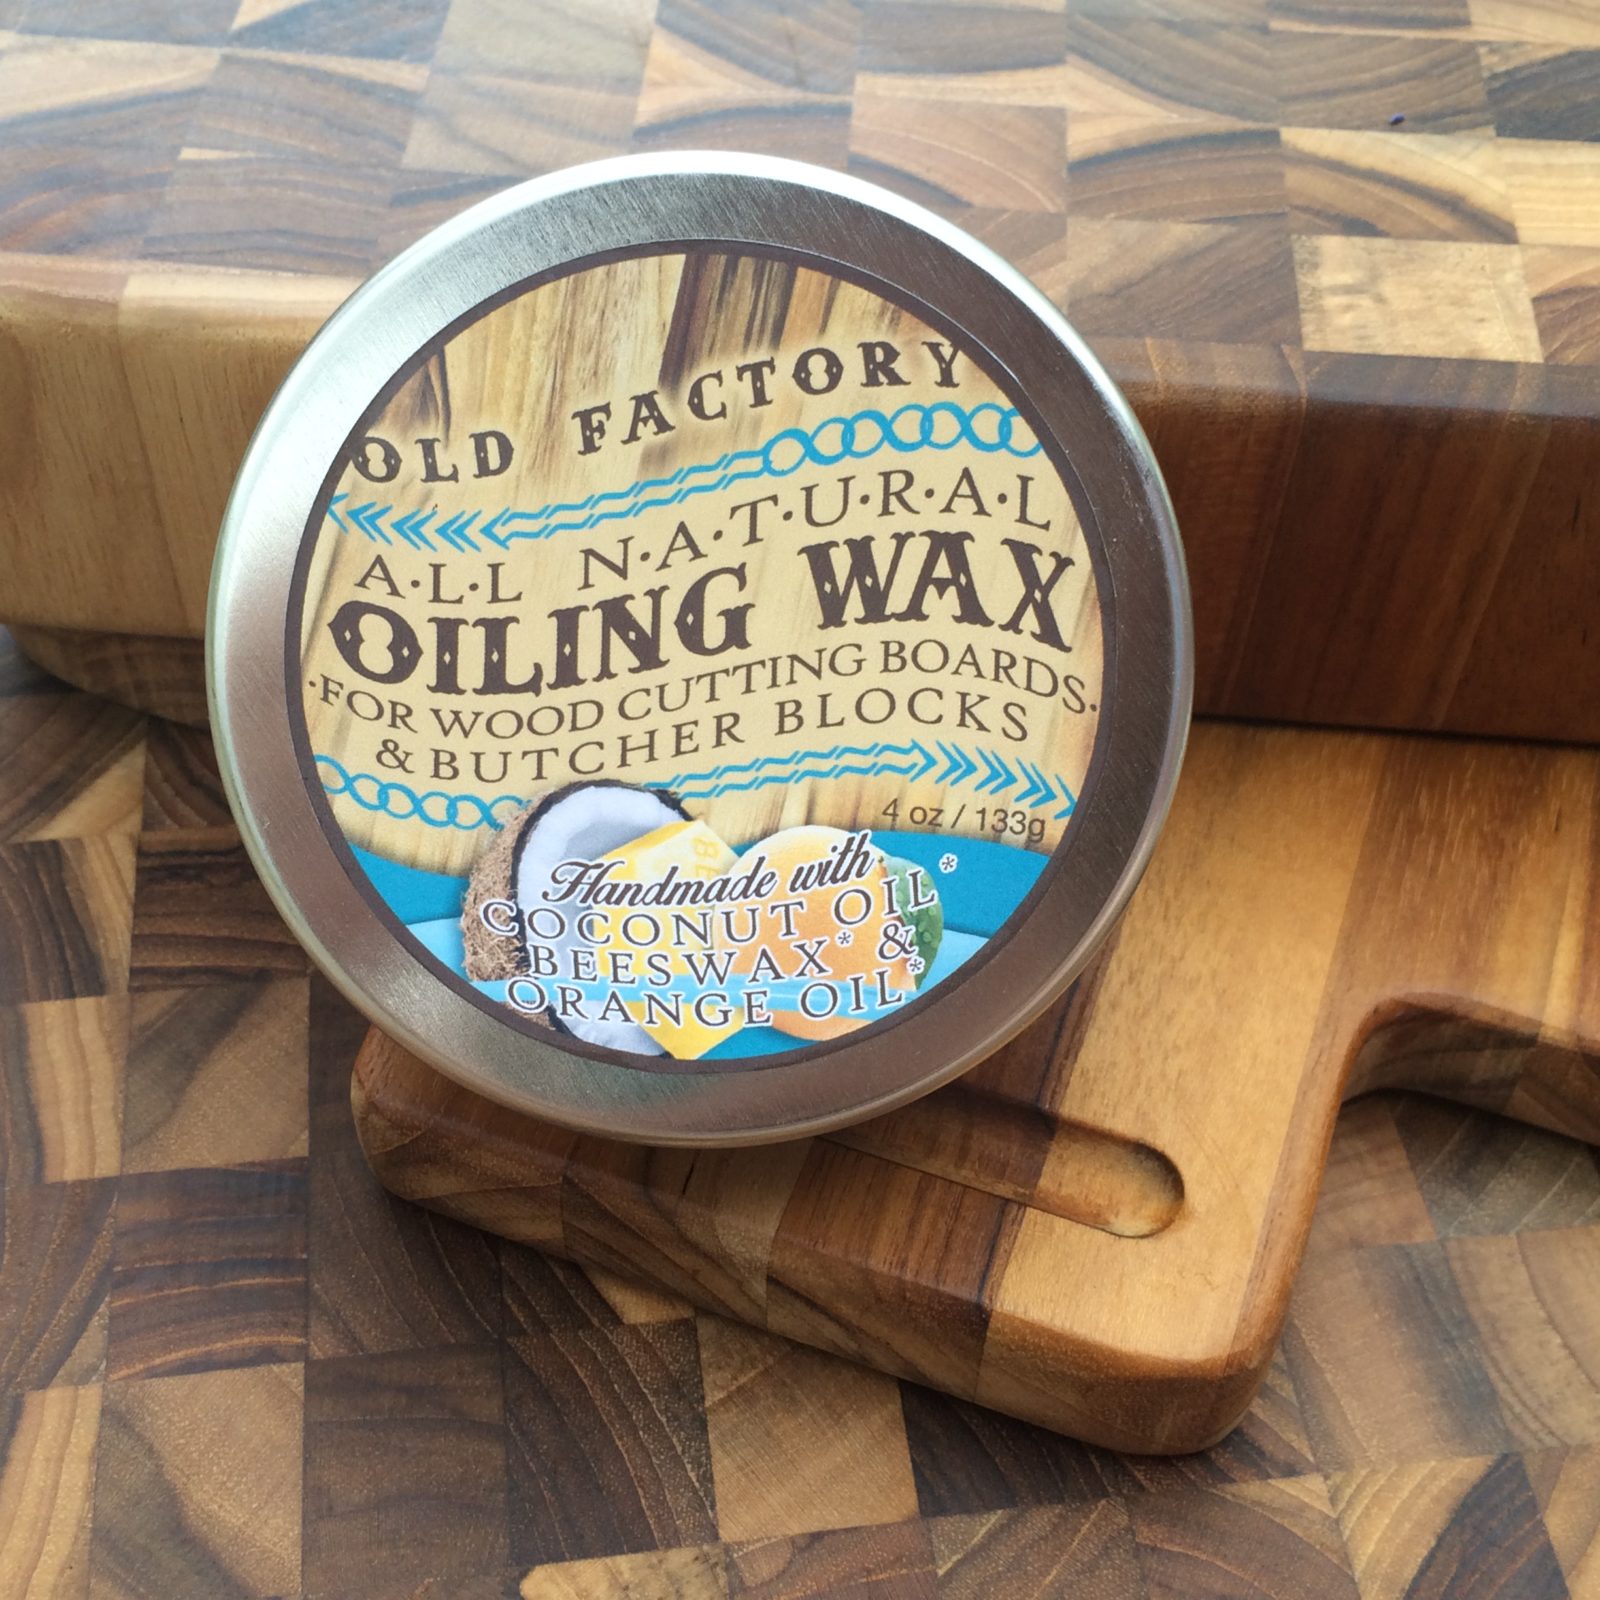 All natural cutting board seasoning wax no mineral oil by old factory